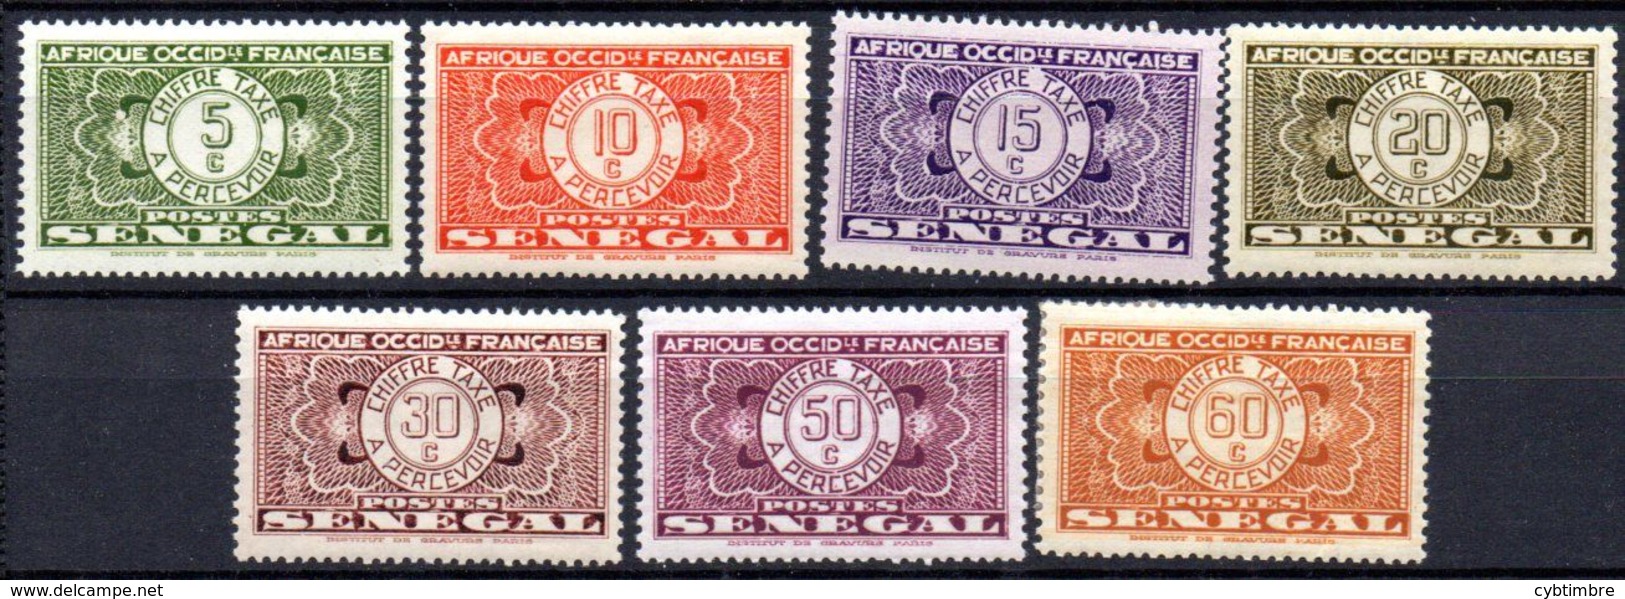 Séngal: Yvert N° T 22/26 Gomme Coloniale - Postage Due